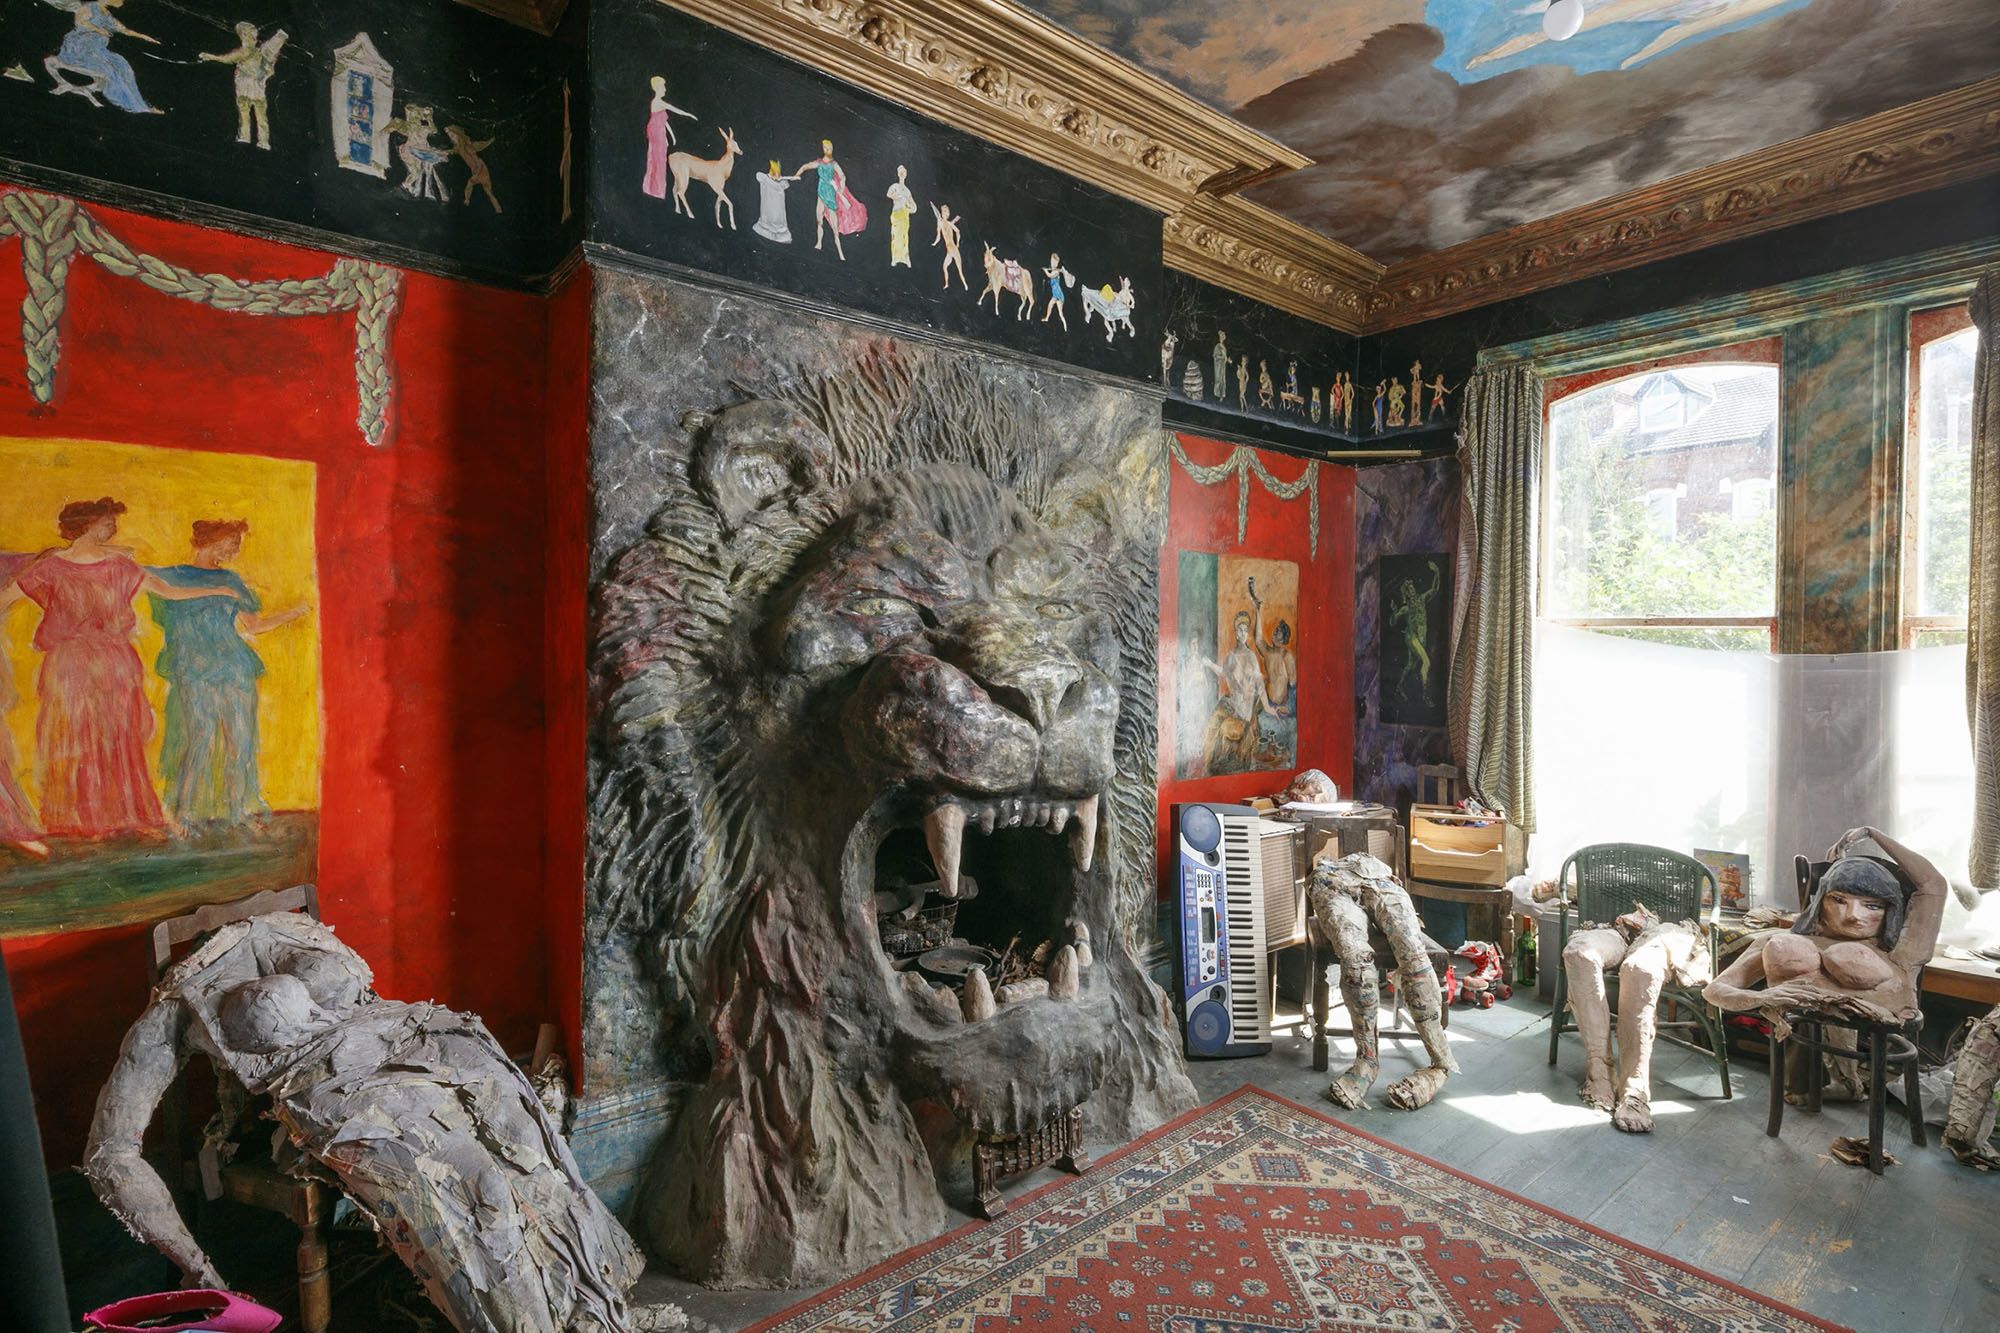 Ron Gittins' family only discovered the artworks in his house after his death in 2019.